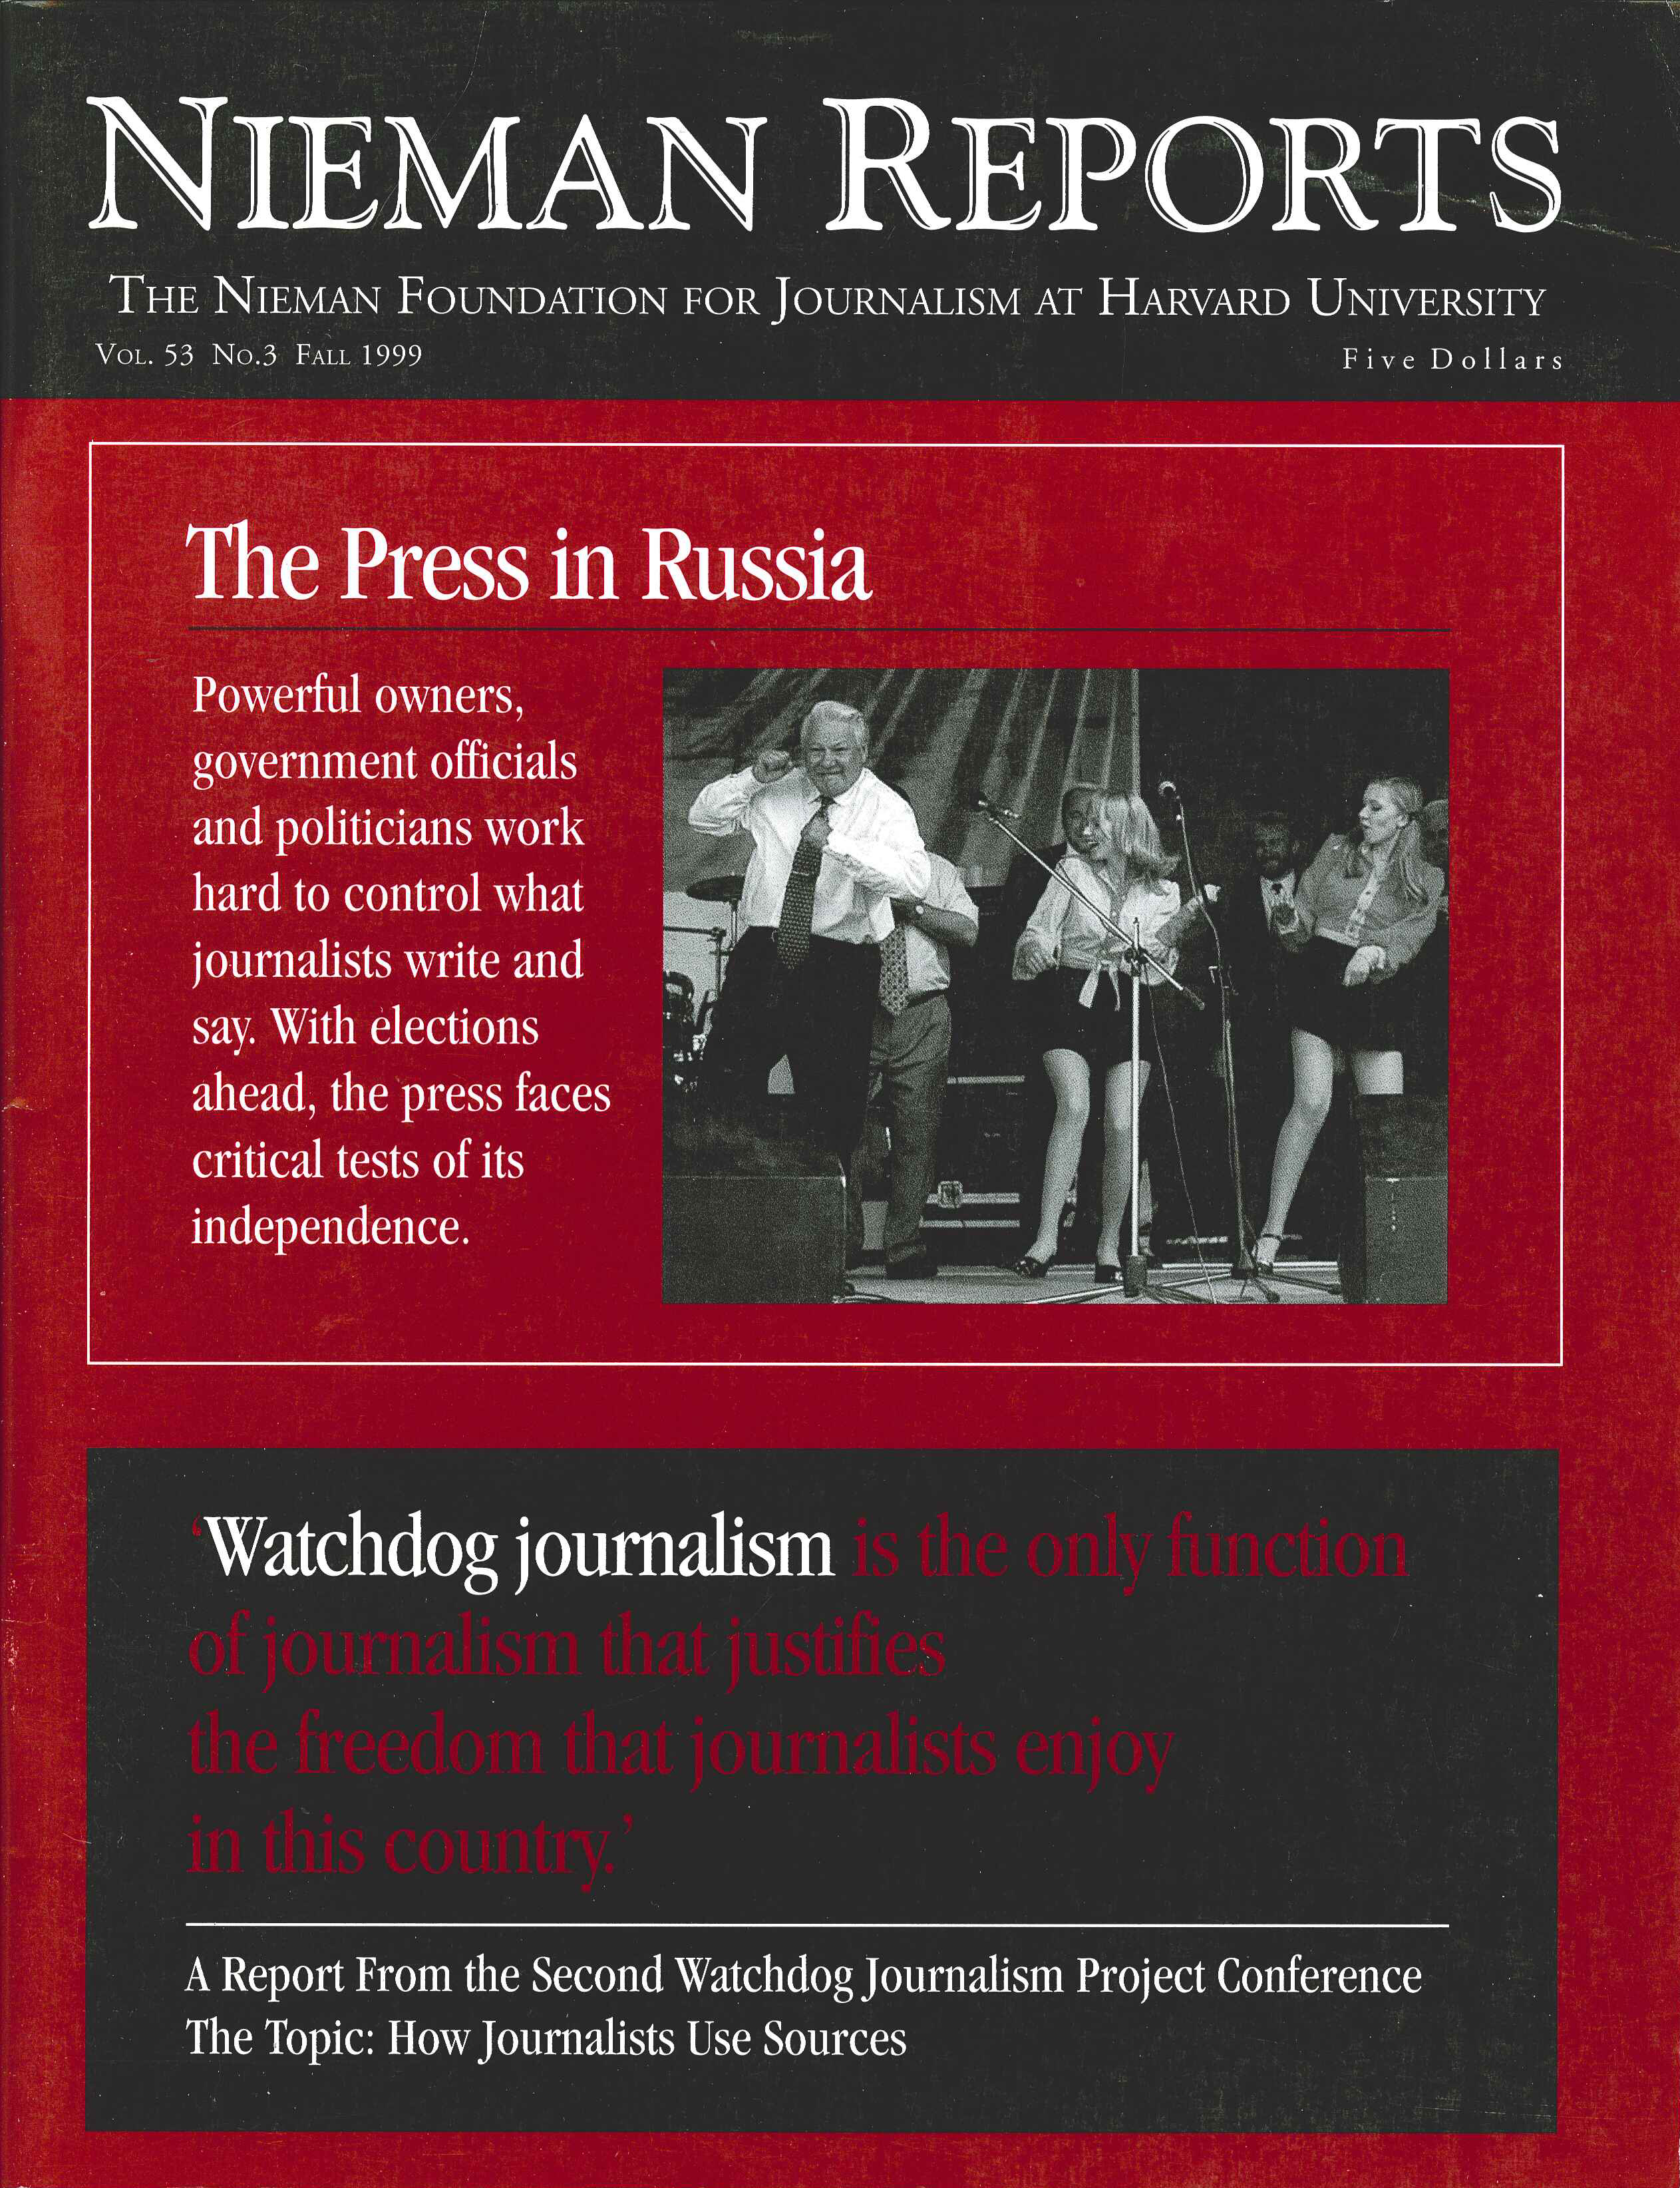 Cover for Fall 1999